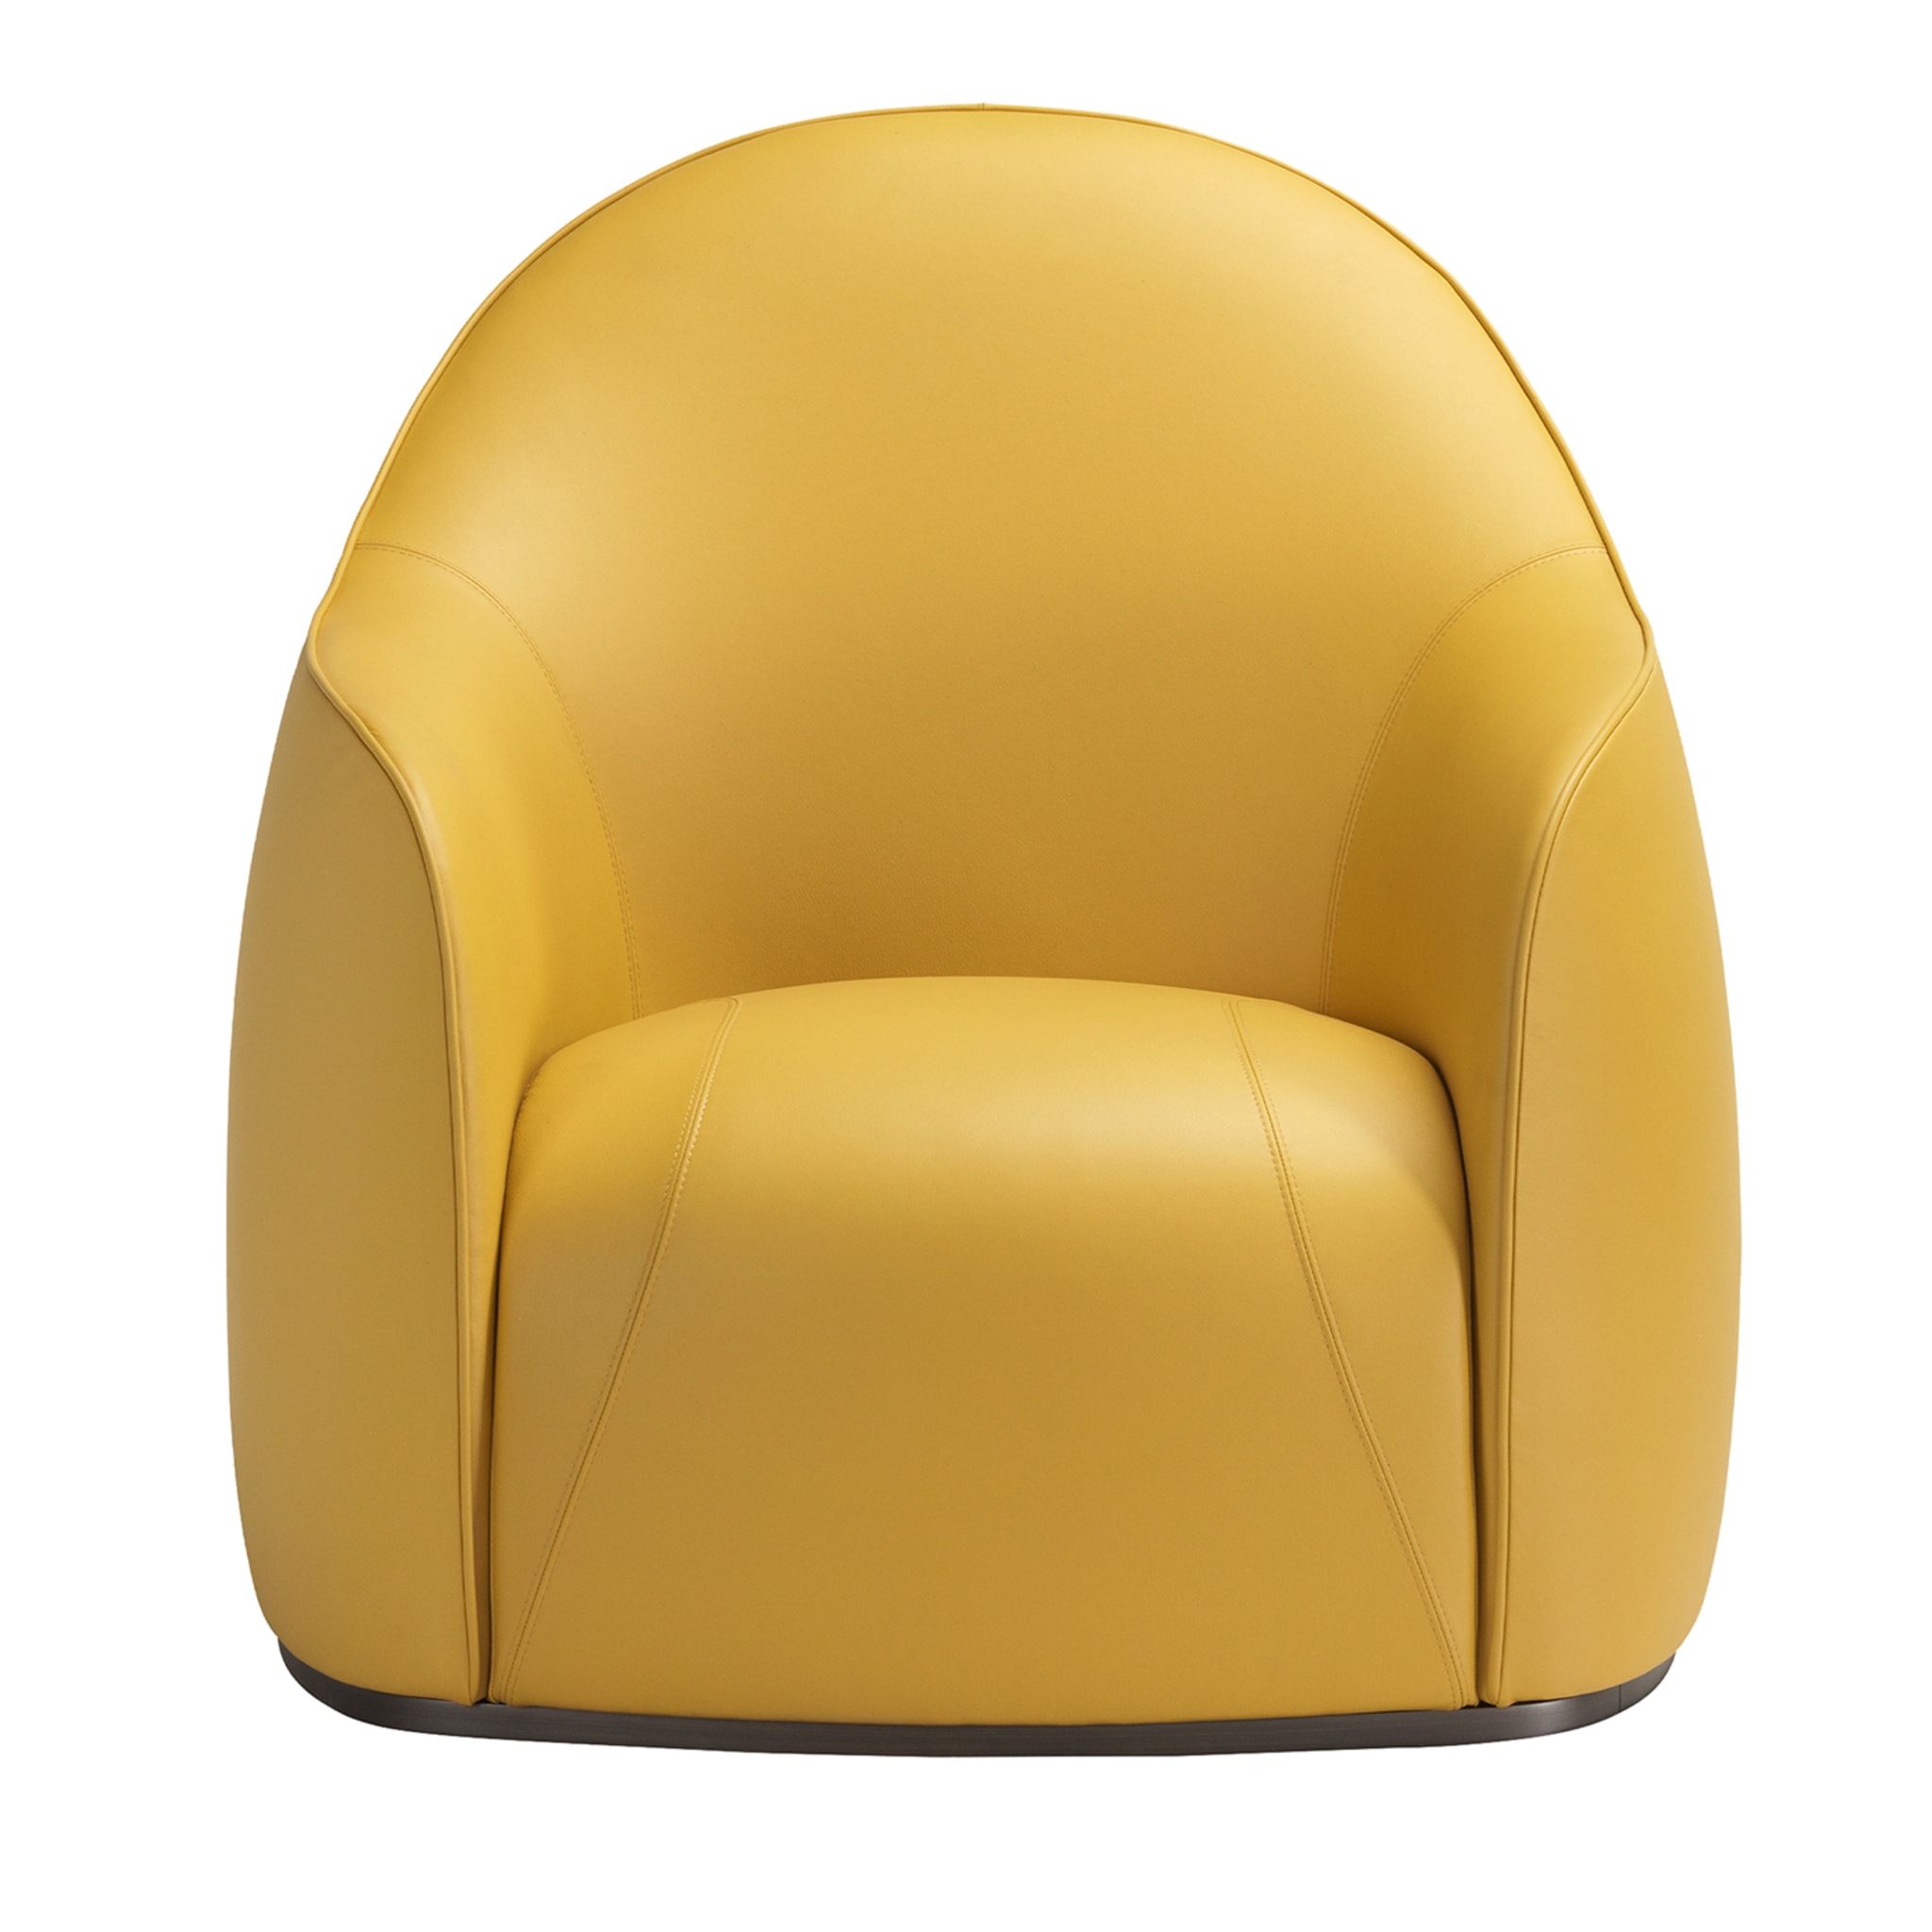 Sweet Mustard Armchair by Elisa Giovannoni - Main view